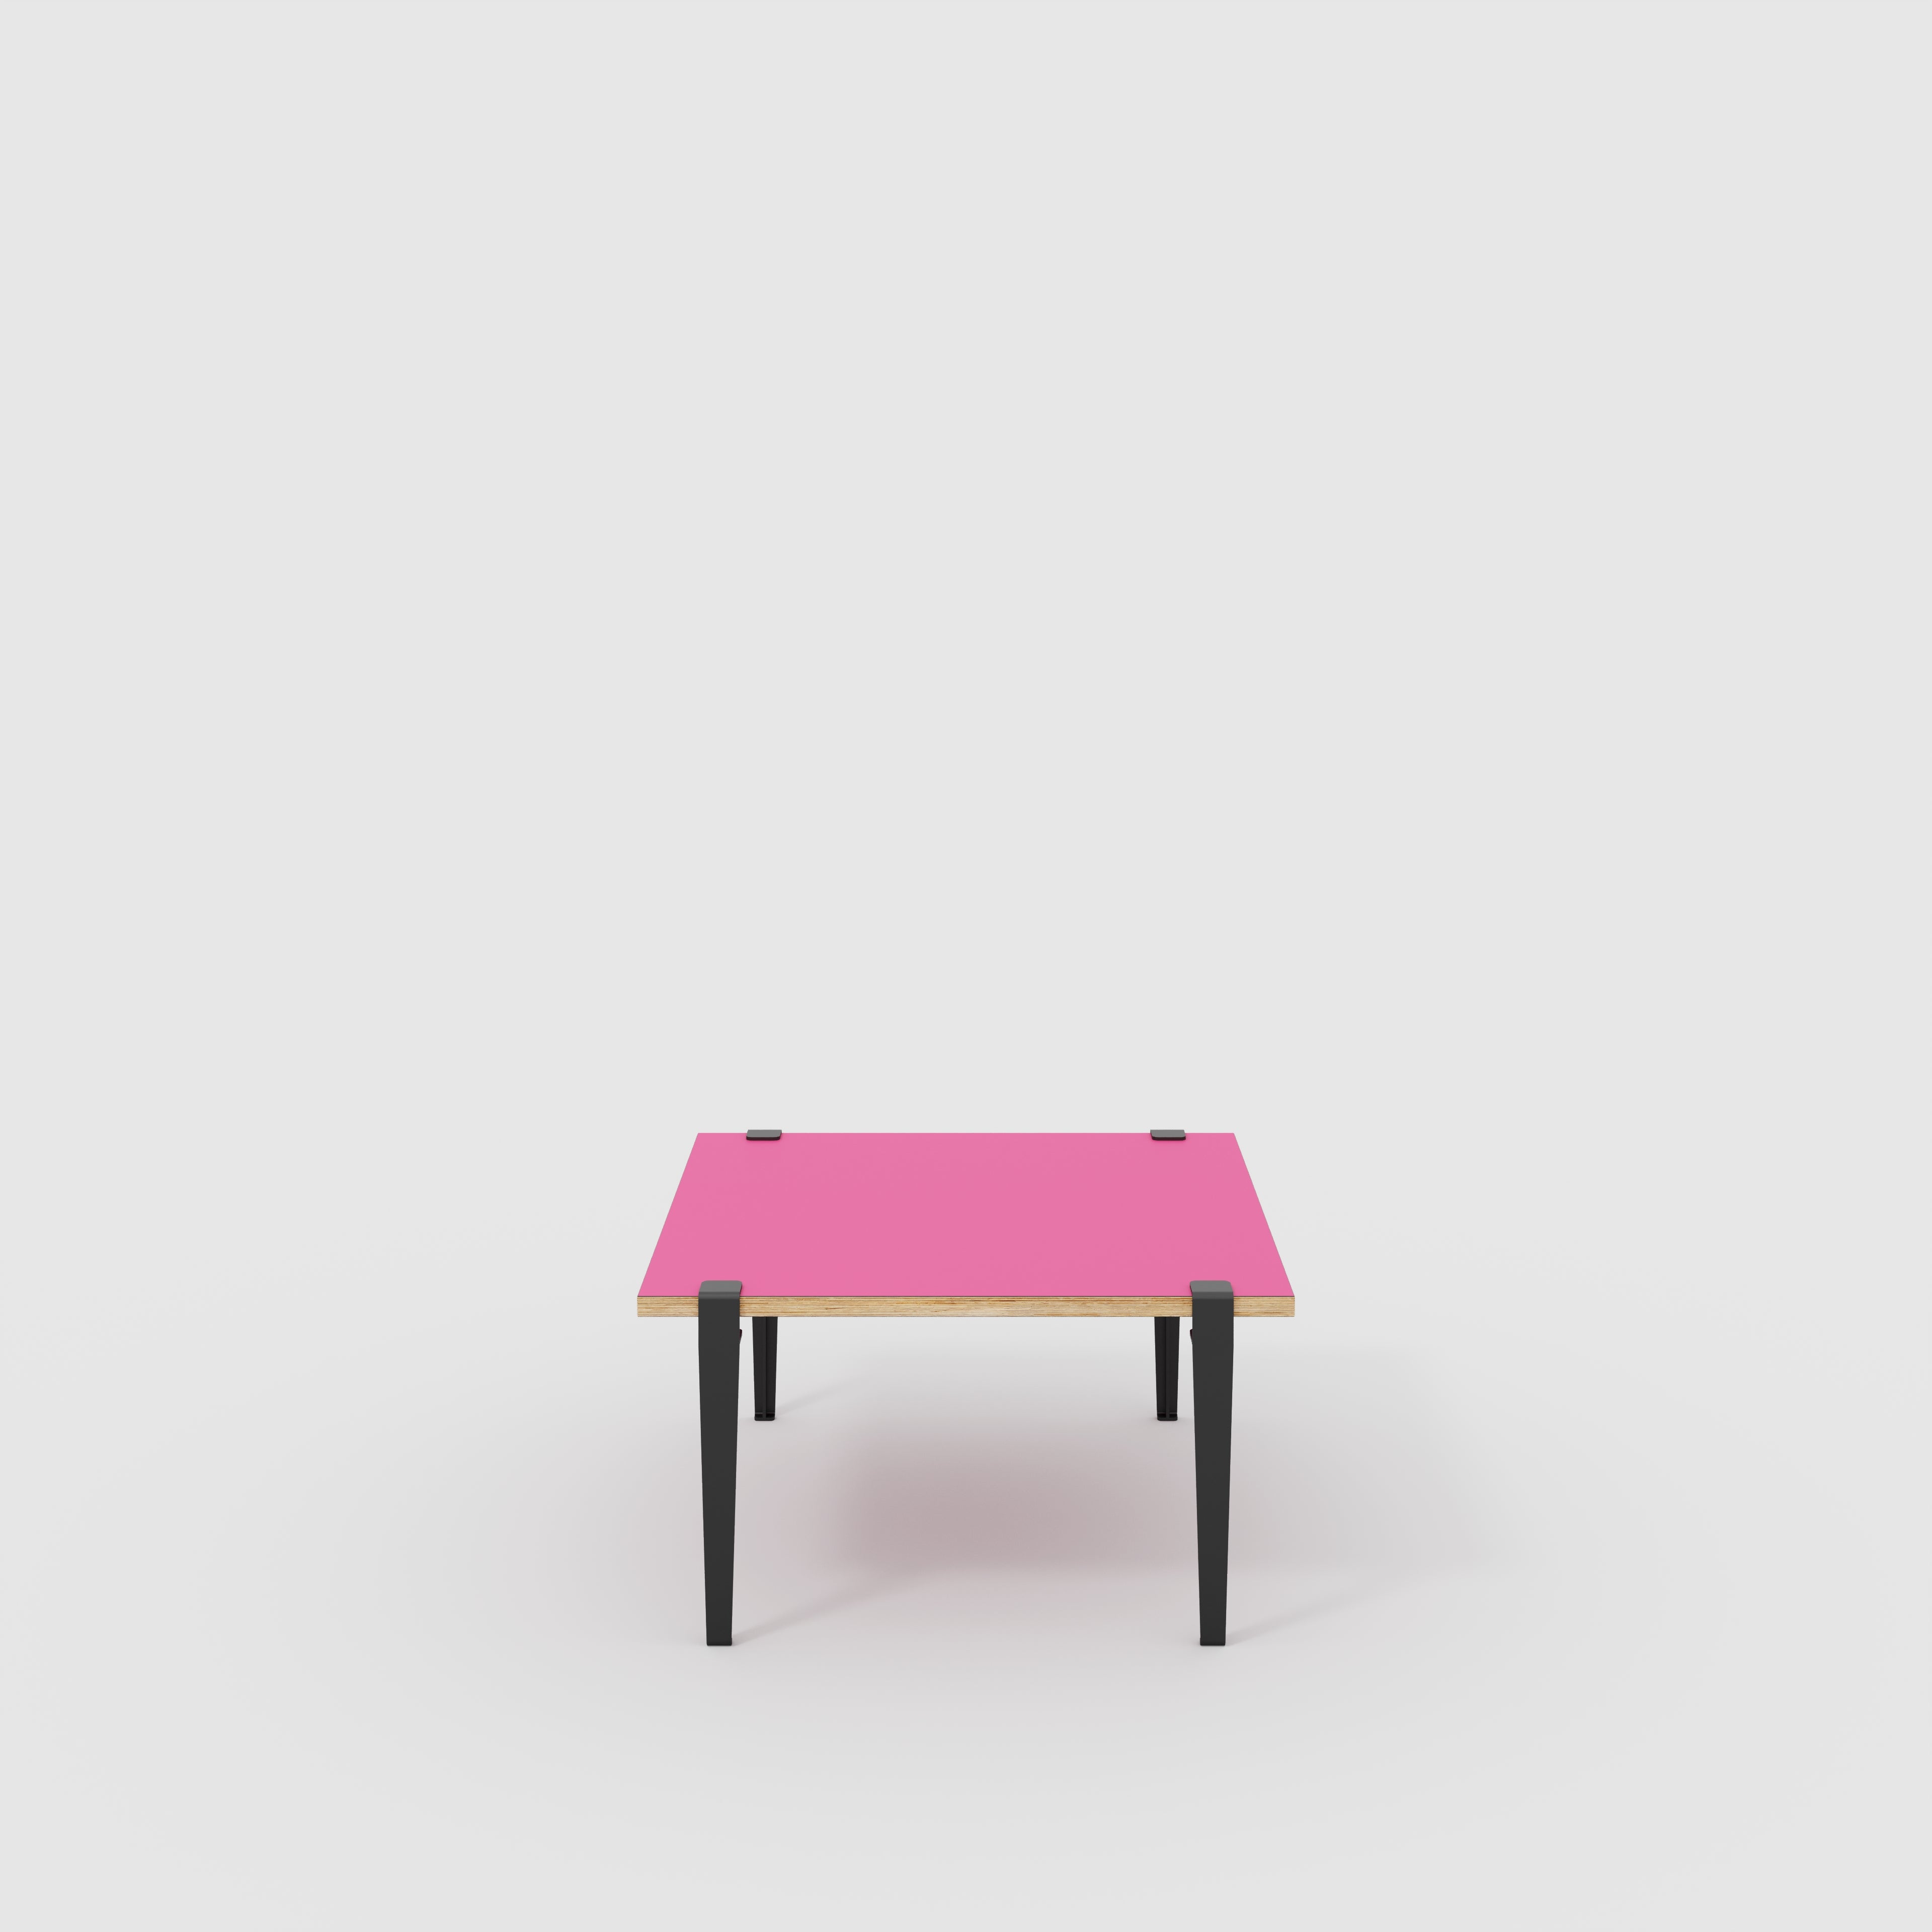 Coffee Table with Black Tiptoe Legs - Formica Juicy Pink - 800(w) x 800(d) x 430(h)